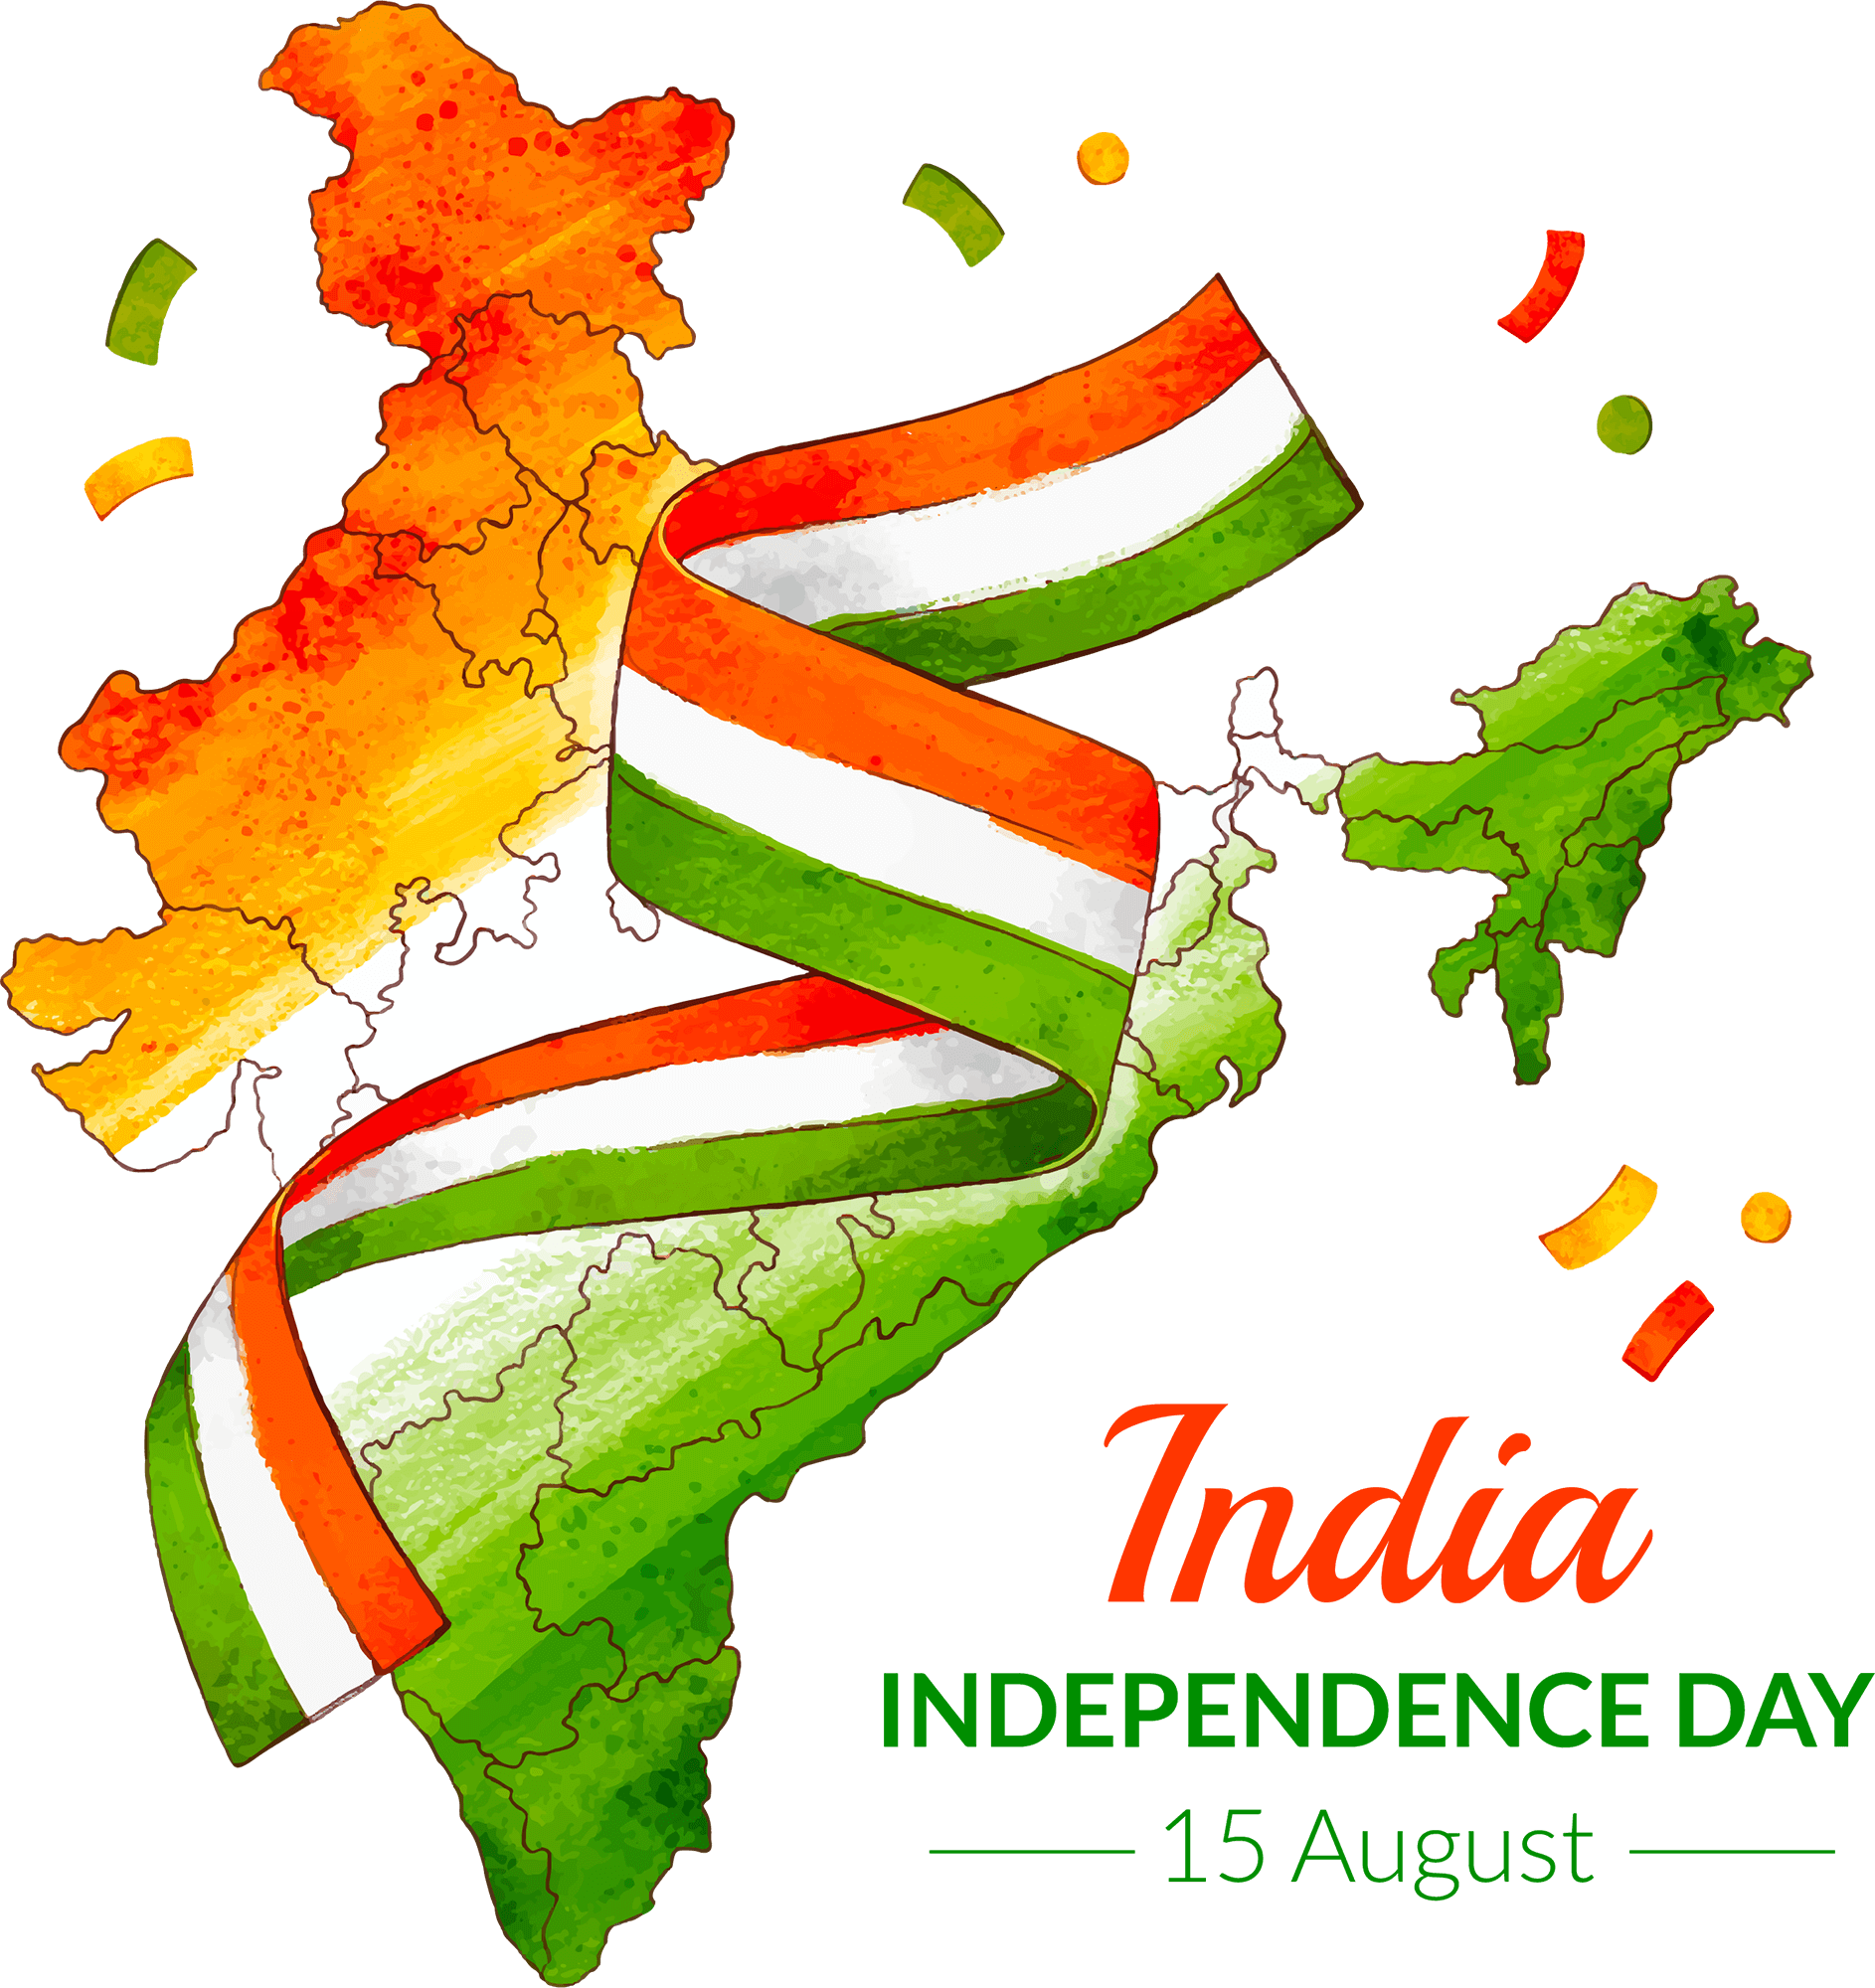 India 75th Independence Day illustration Happy India Independence Day